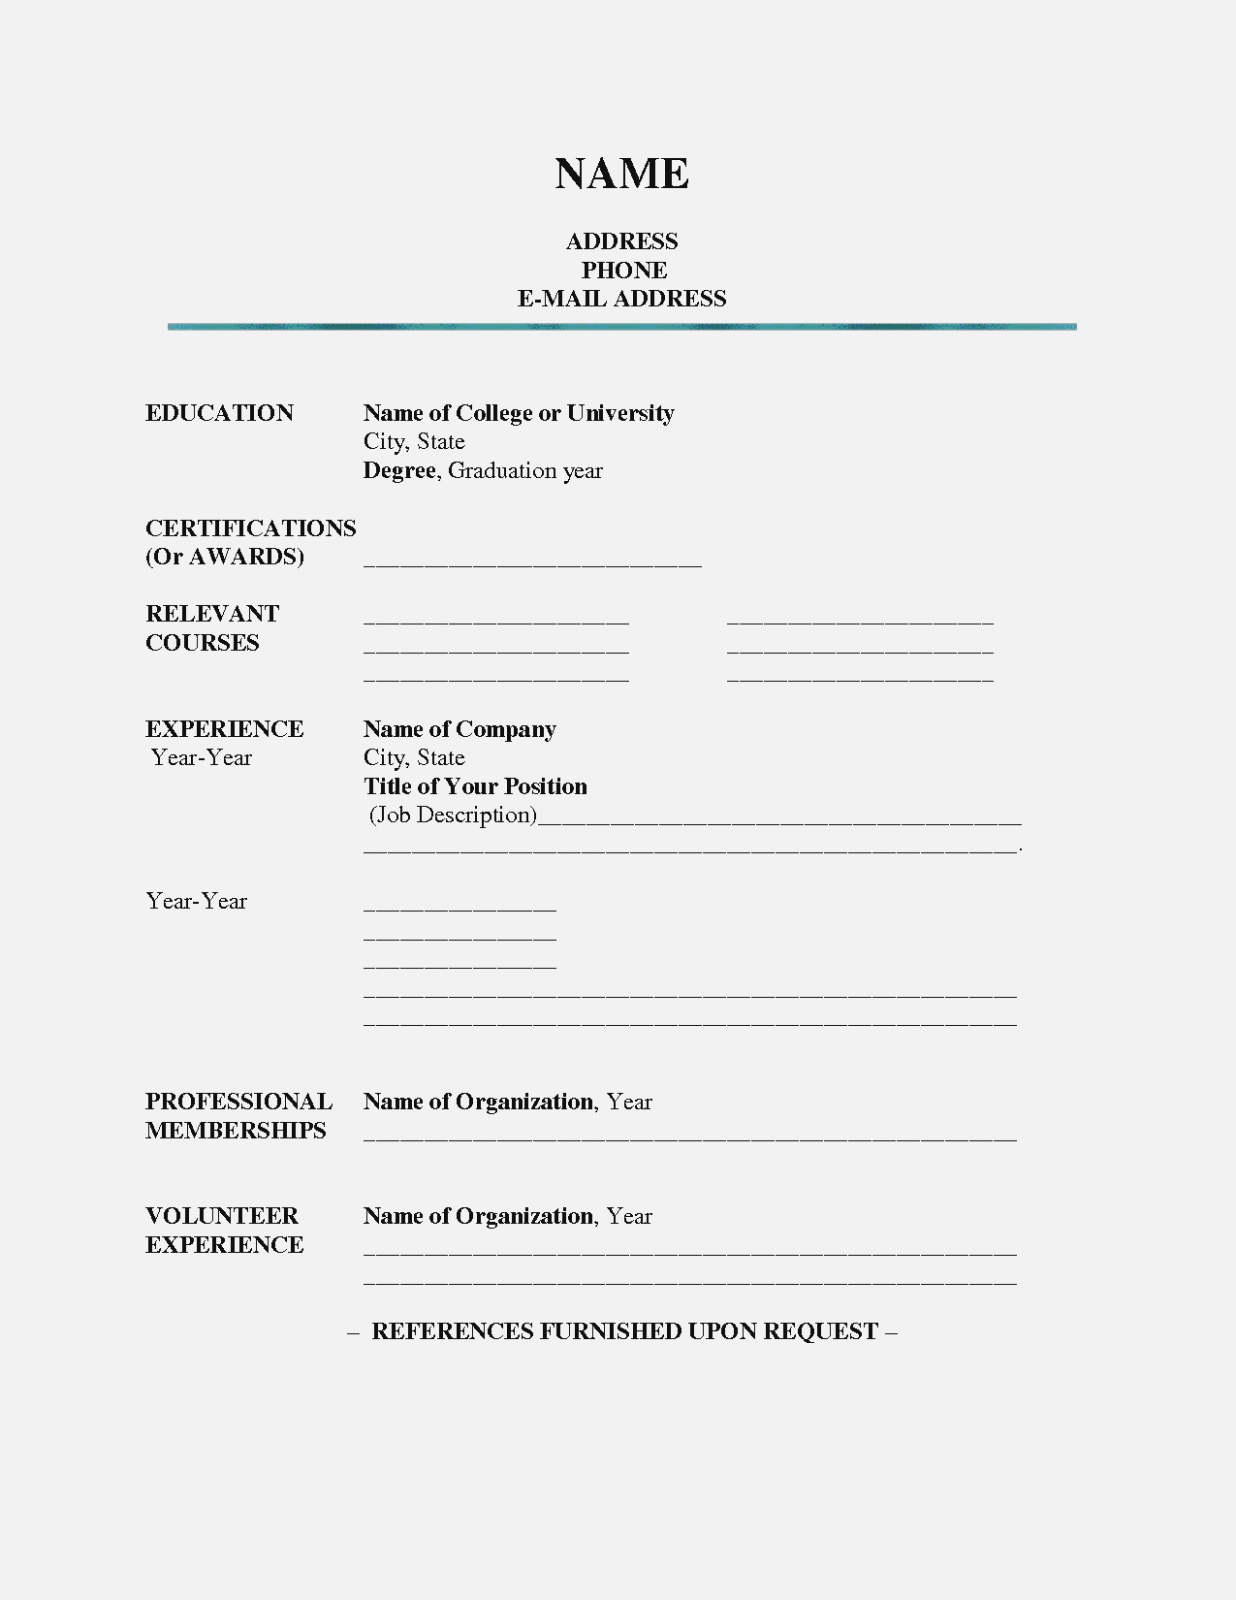 Five Moments To Remember | Invoice And Resume Template Ideas - Free Printable Resume Templates